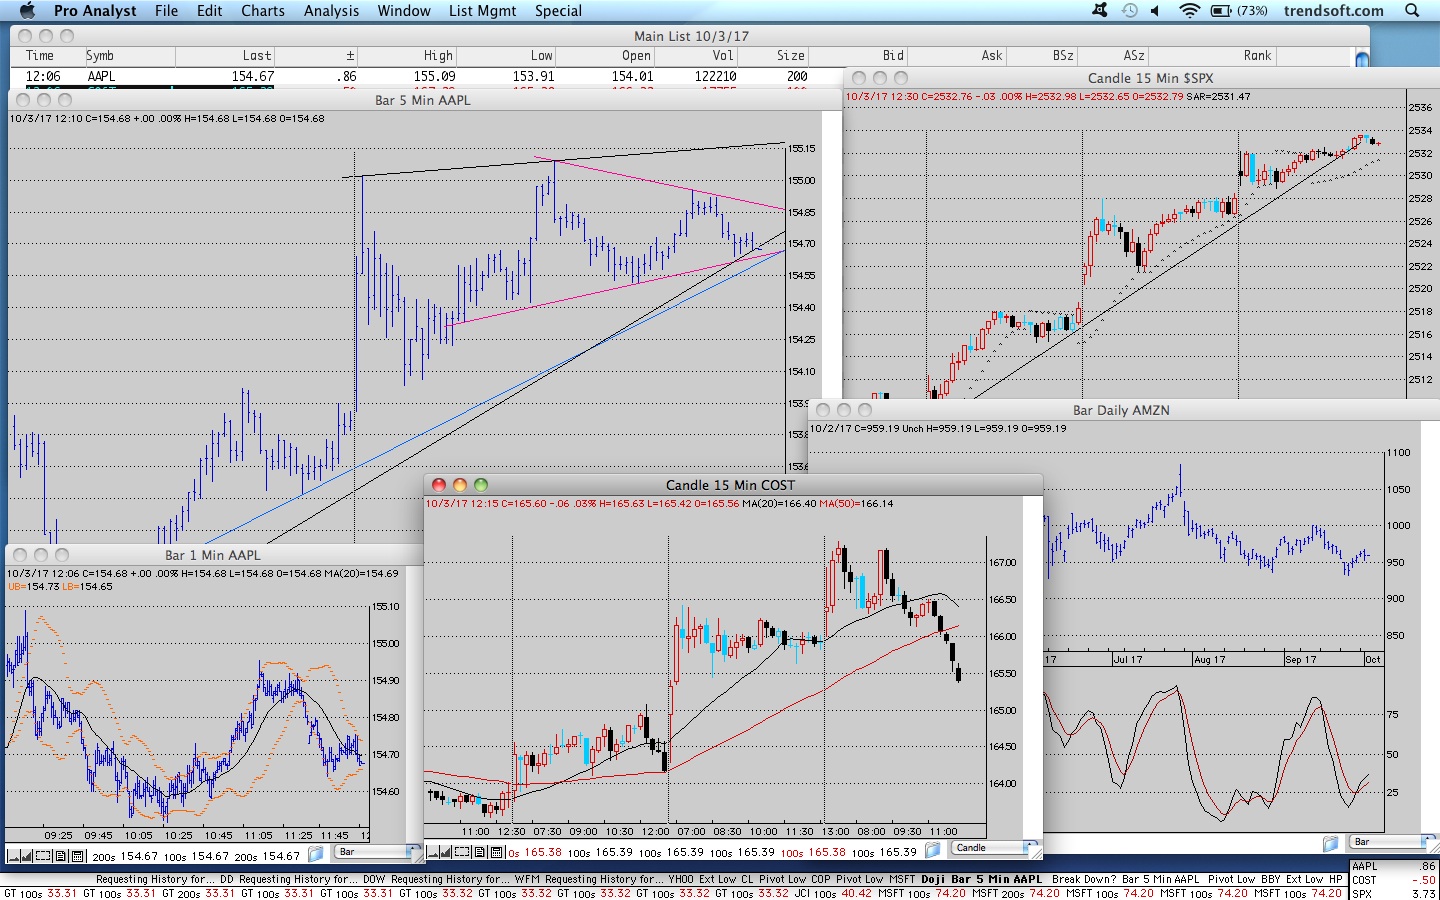 sample screenshot showing layout of five charts created by Pro Analyst